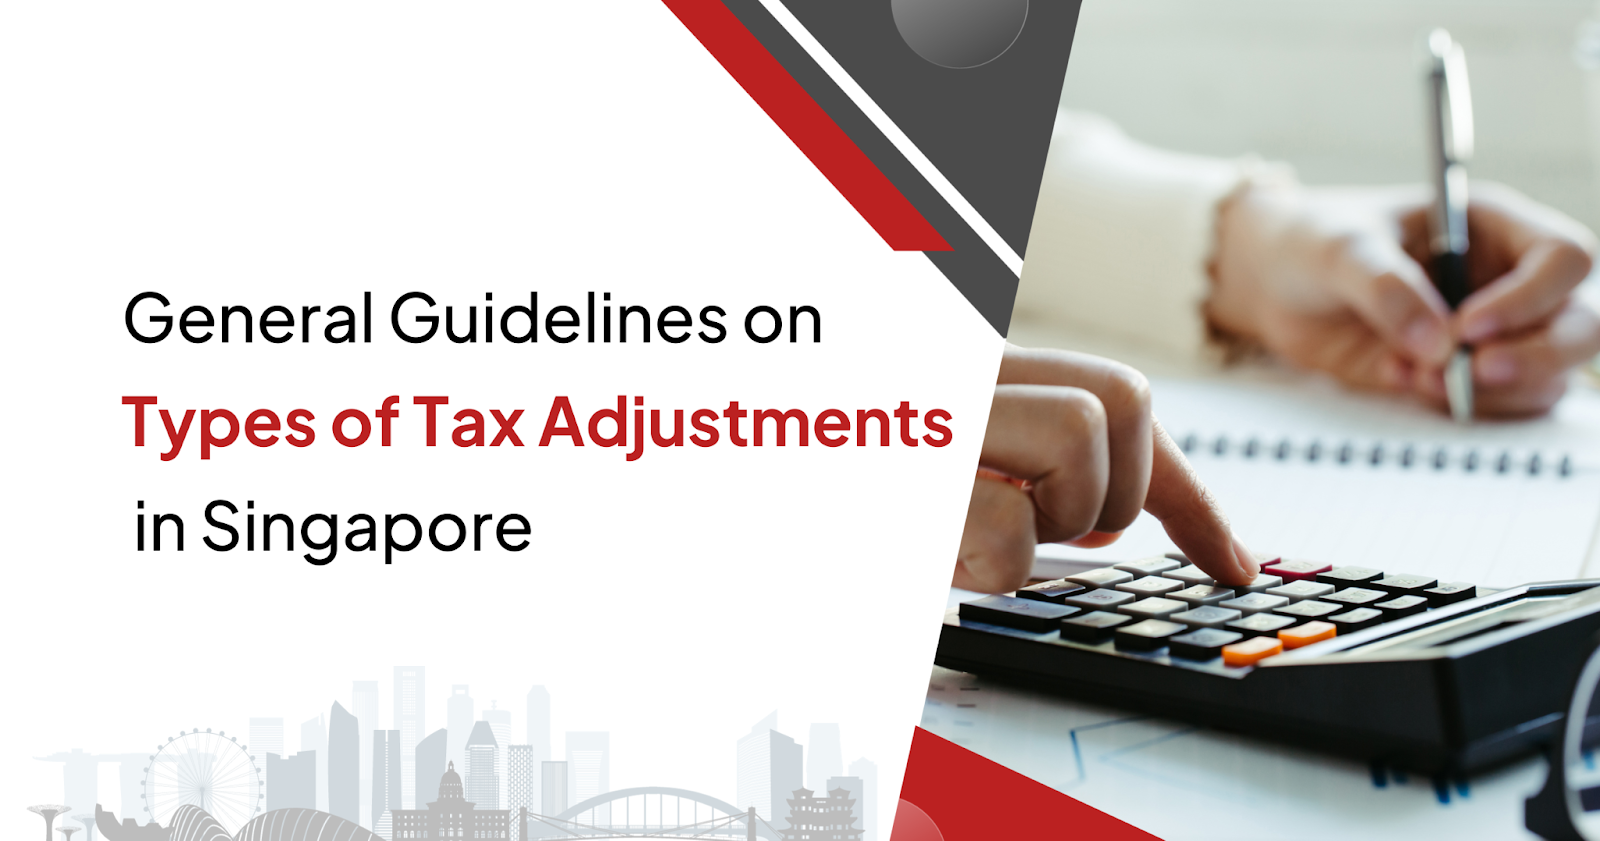 General Guidelines on Types of Tax Adjustments in Singapore